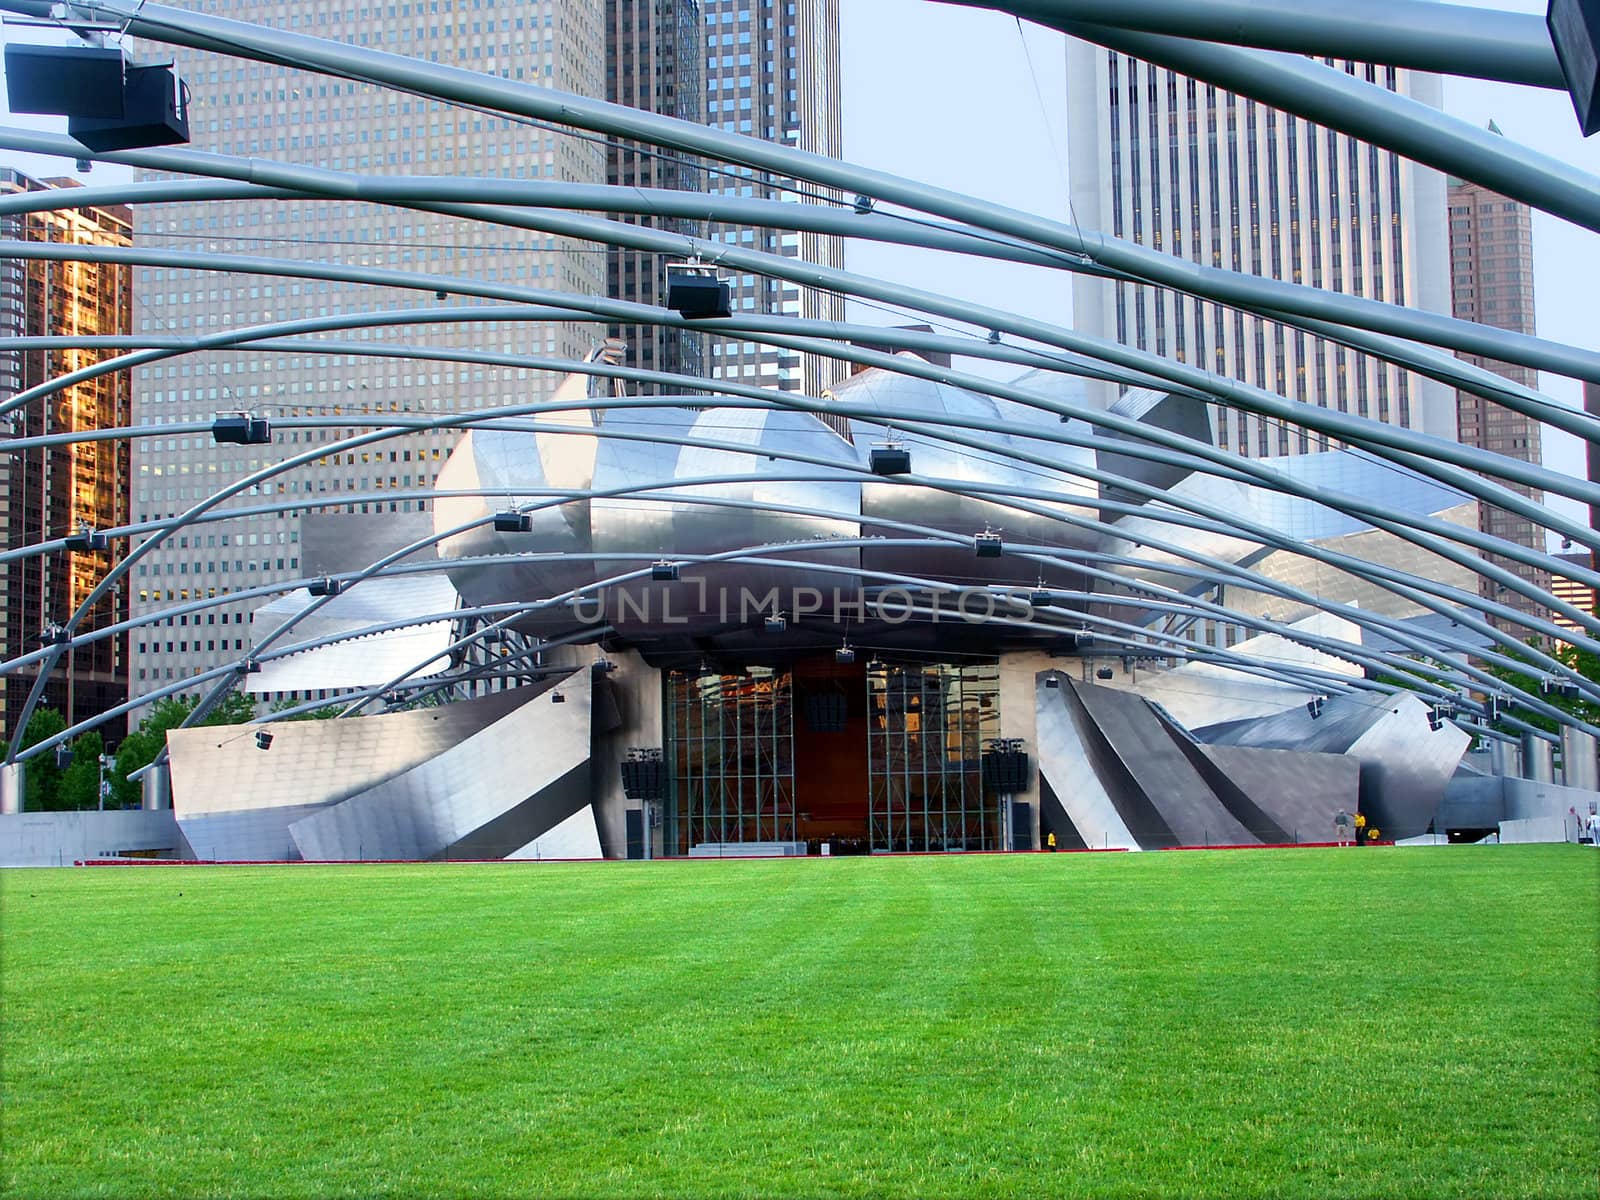 Chicago, USA - June 07, 2005: The Jay Pritzker Pavilion hosts various musical acts in Chicago.  It is part of Millennium Park and was opened in 2004.